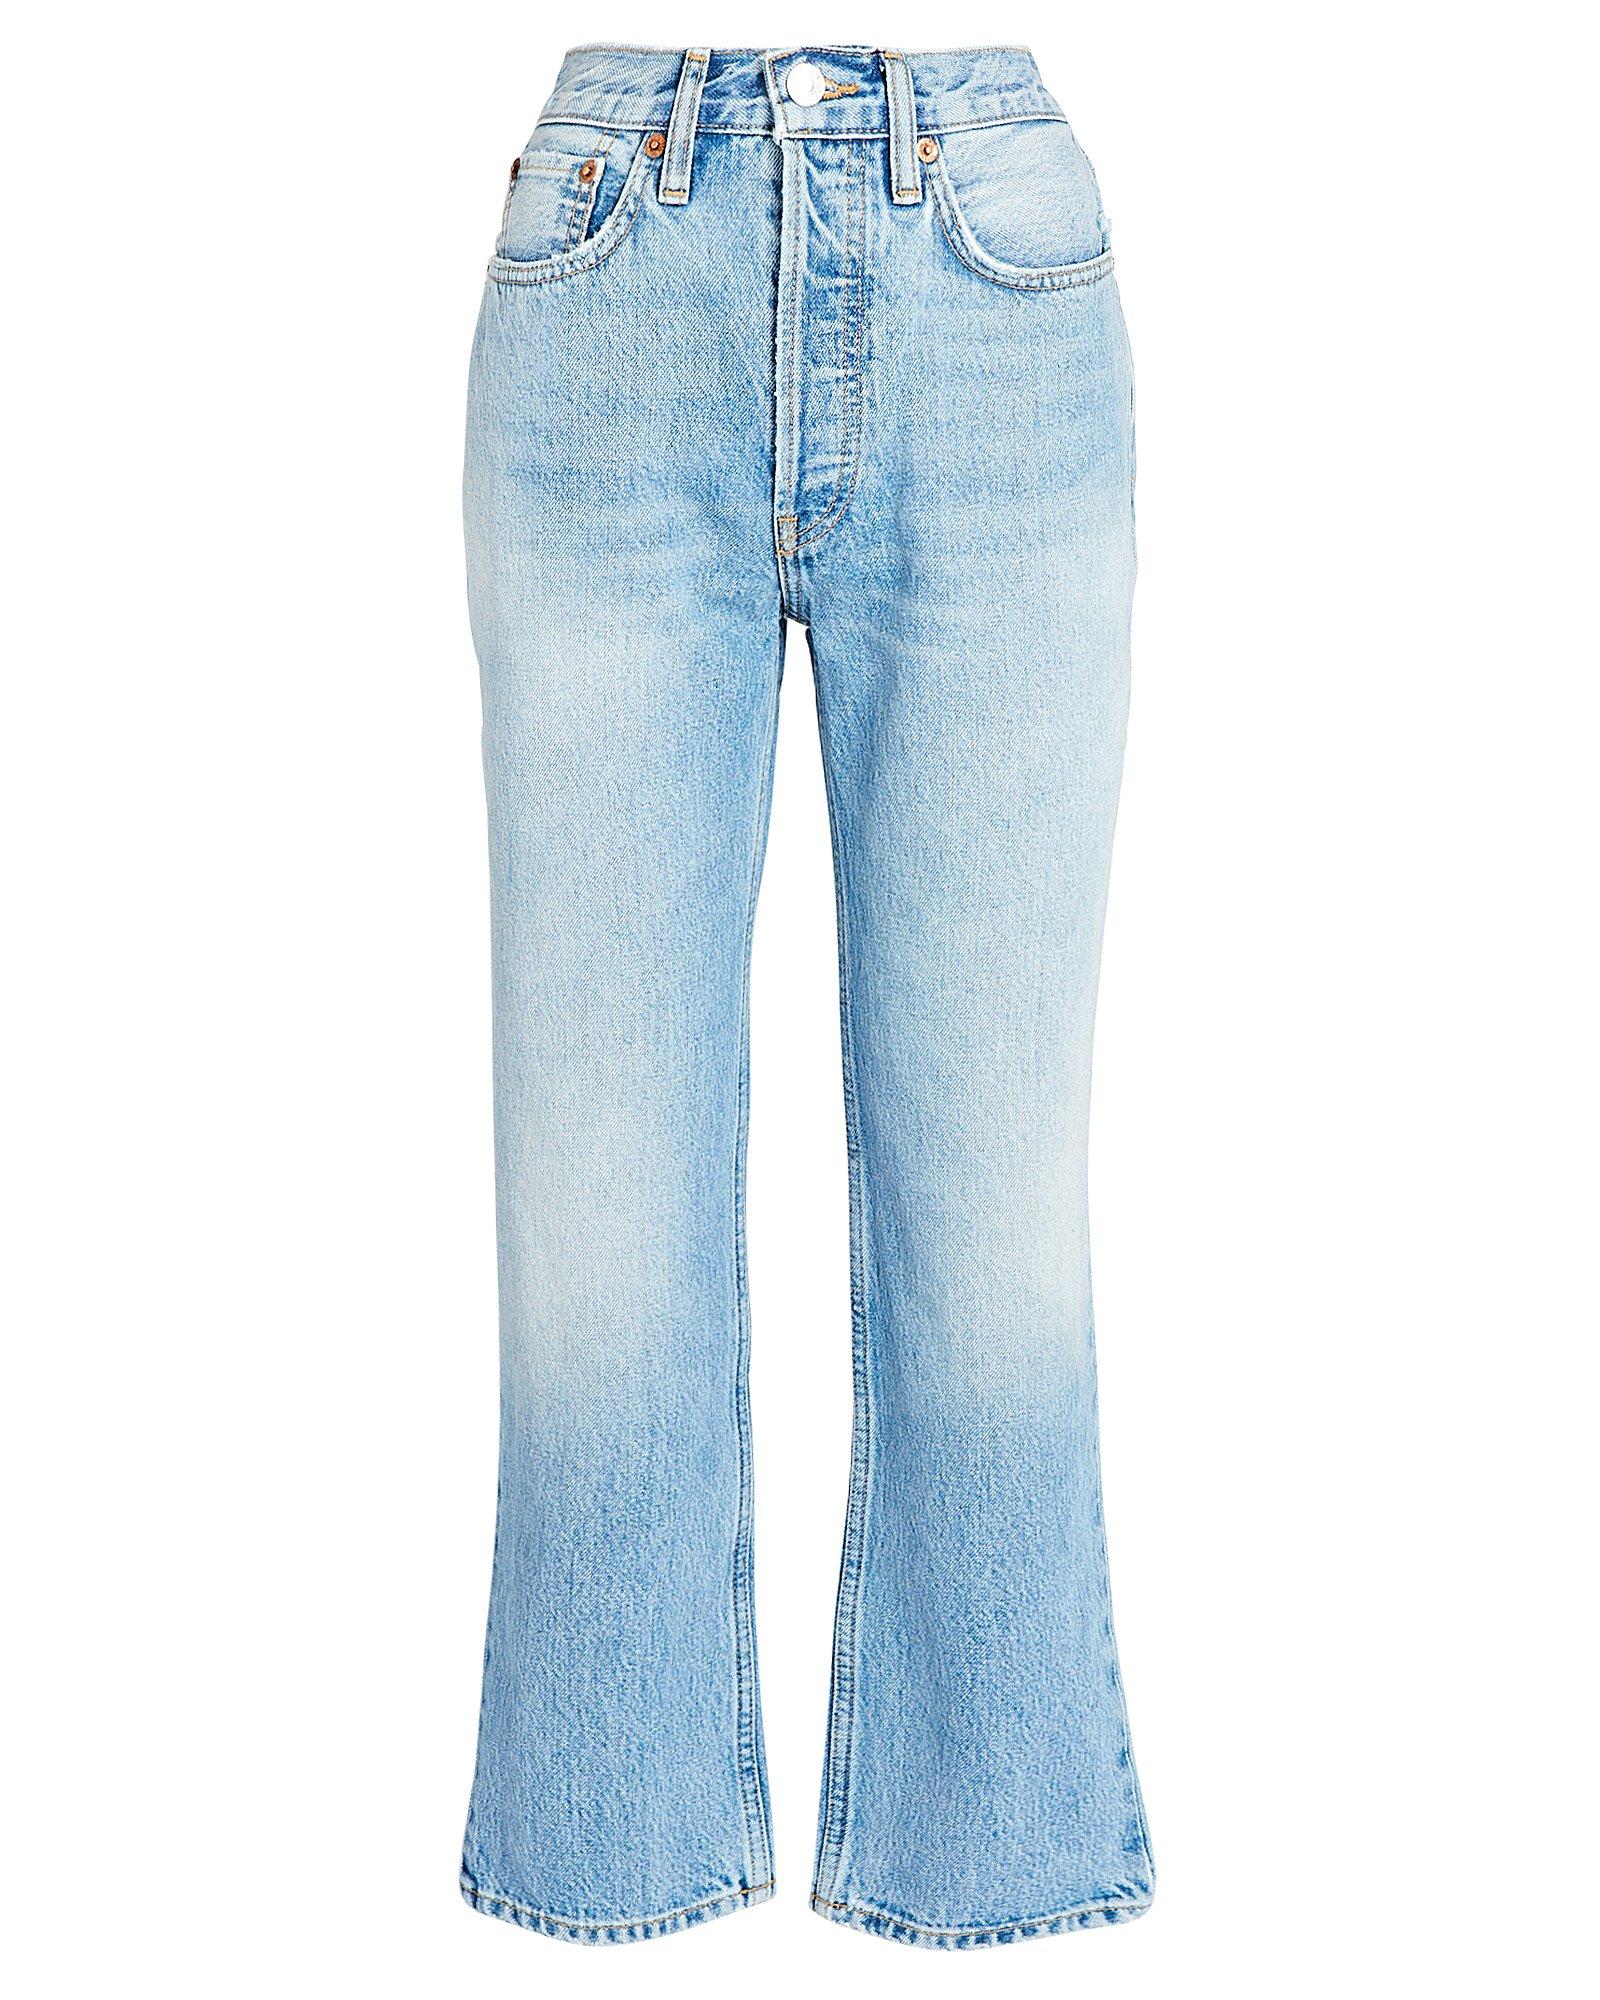 RE/DONE Denim 70s High-rise Stove Pipe Jeans in Light 3 (Blue) - Save ...